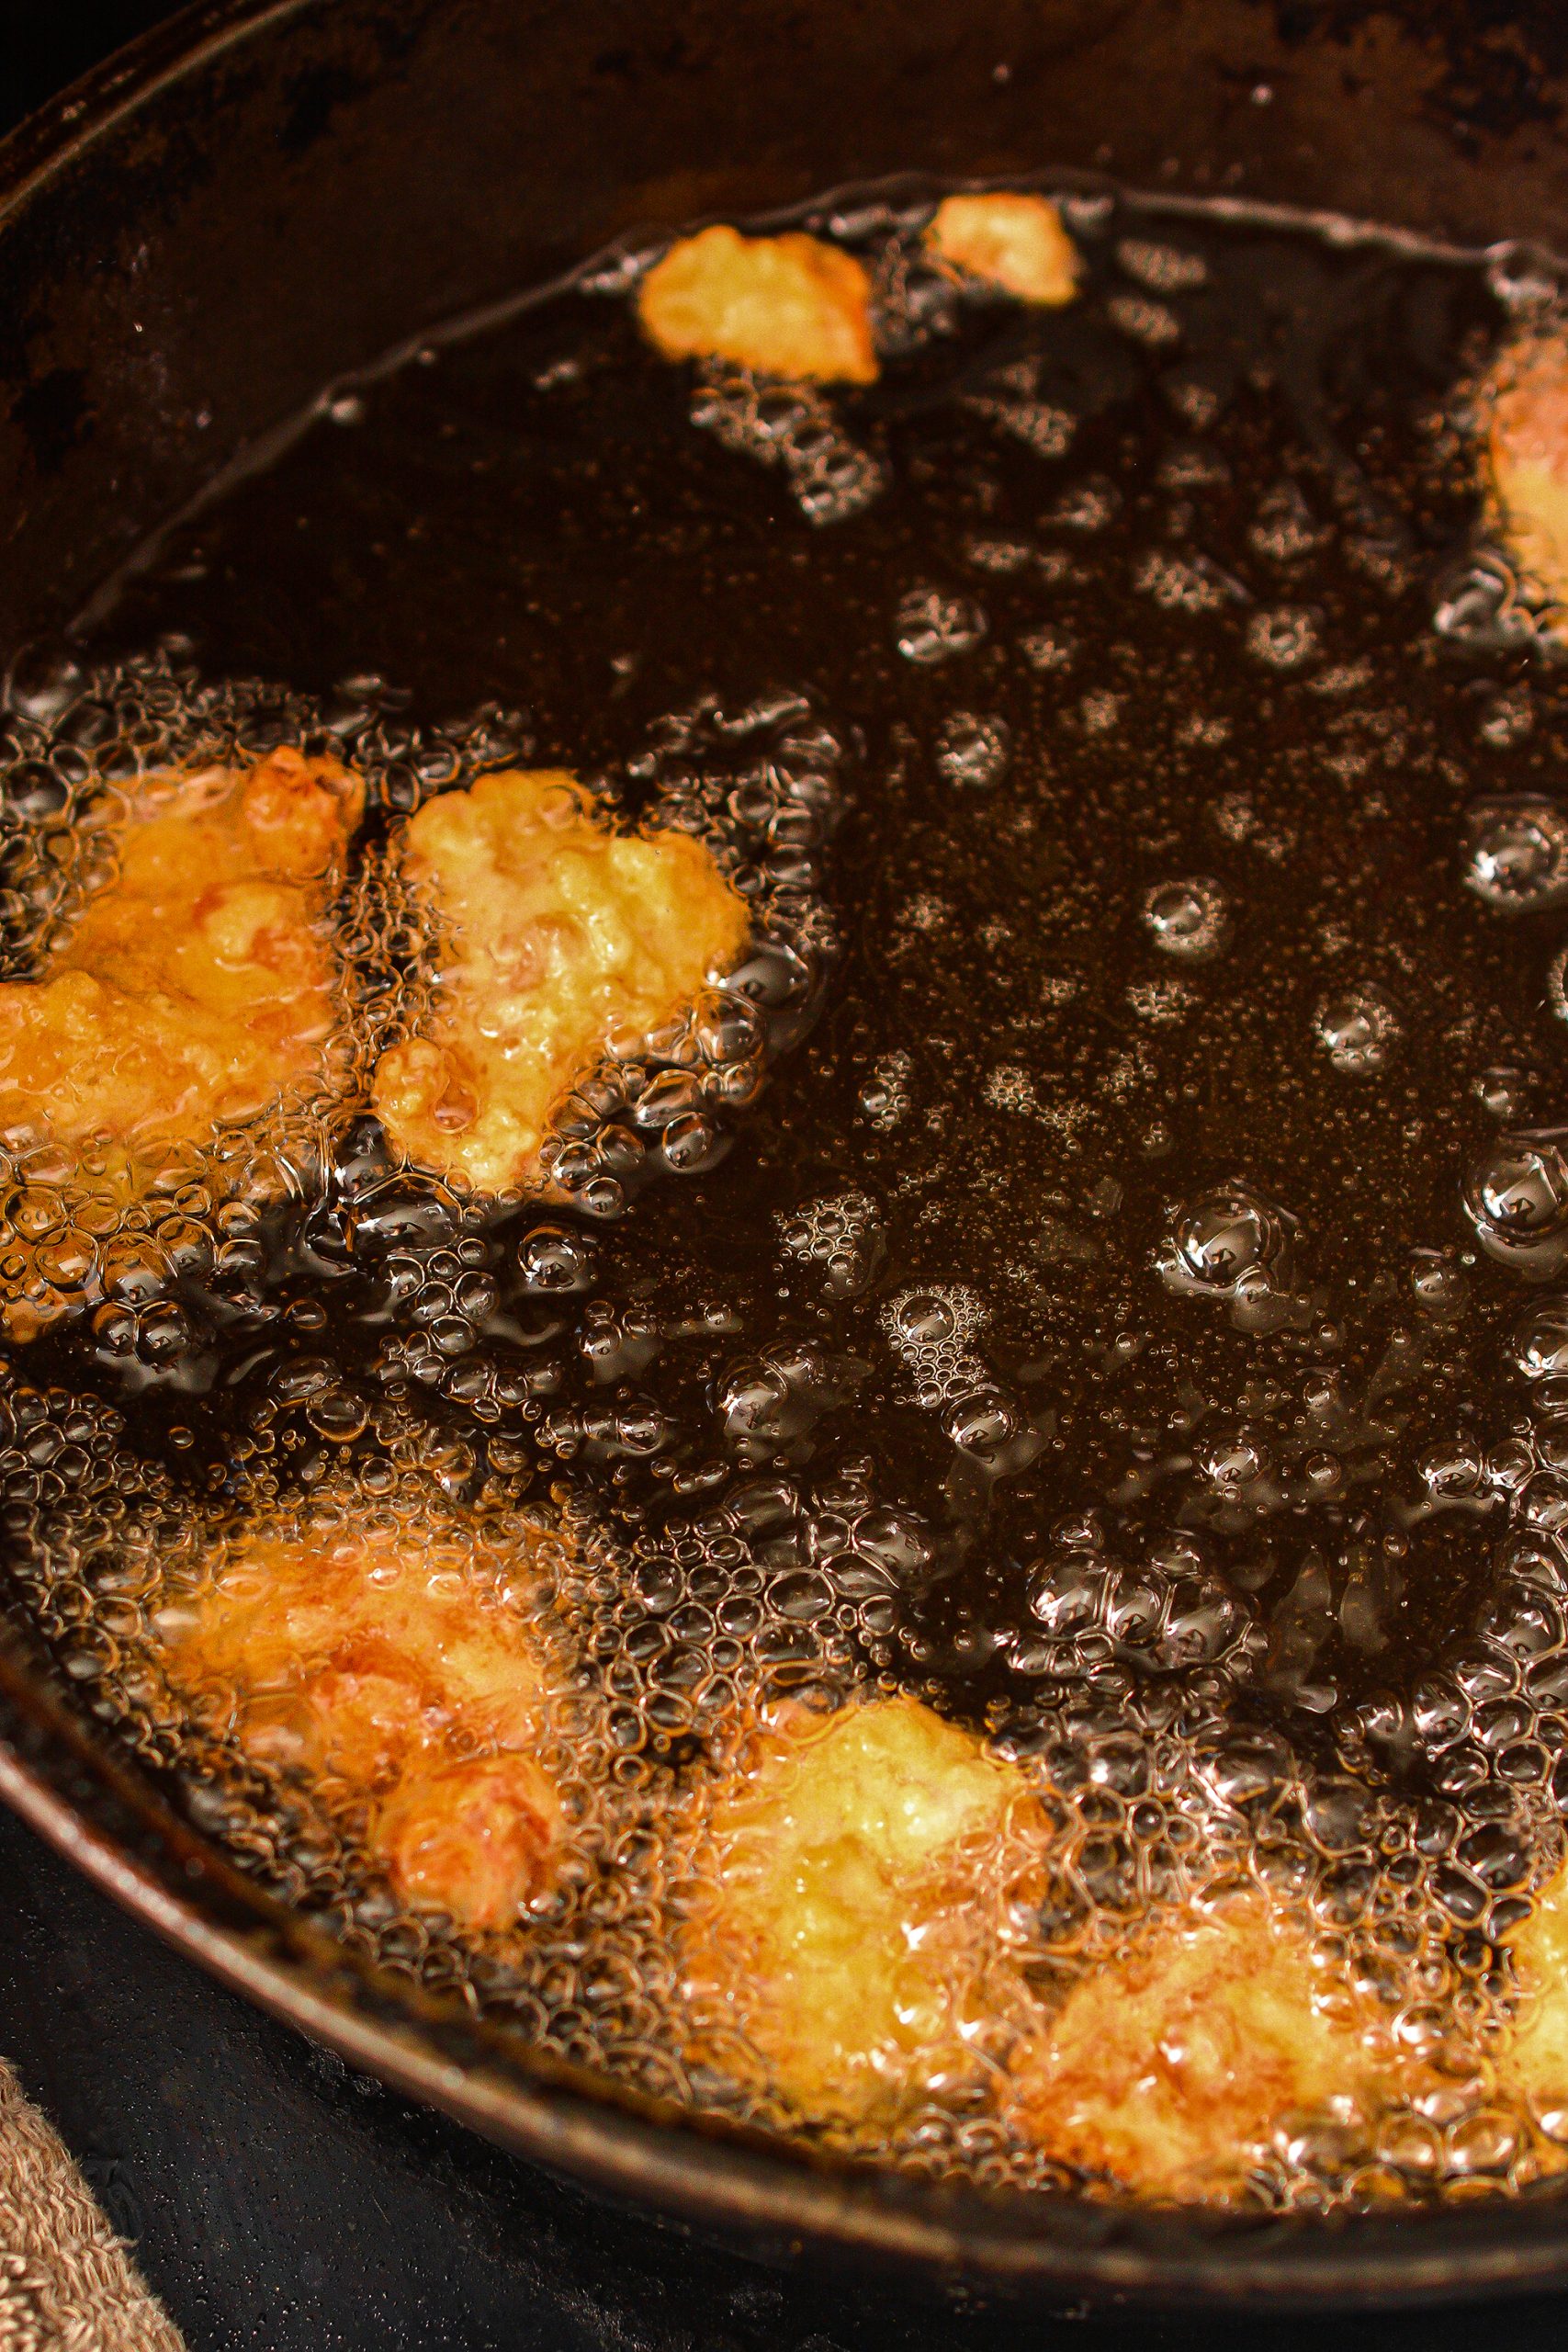 Add the coated chicken one piece at a time to the hot oil and fry until golden brown and cooked through.